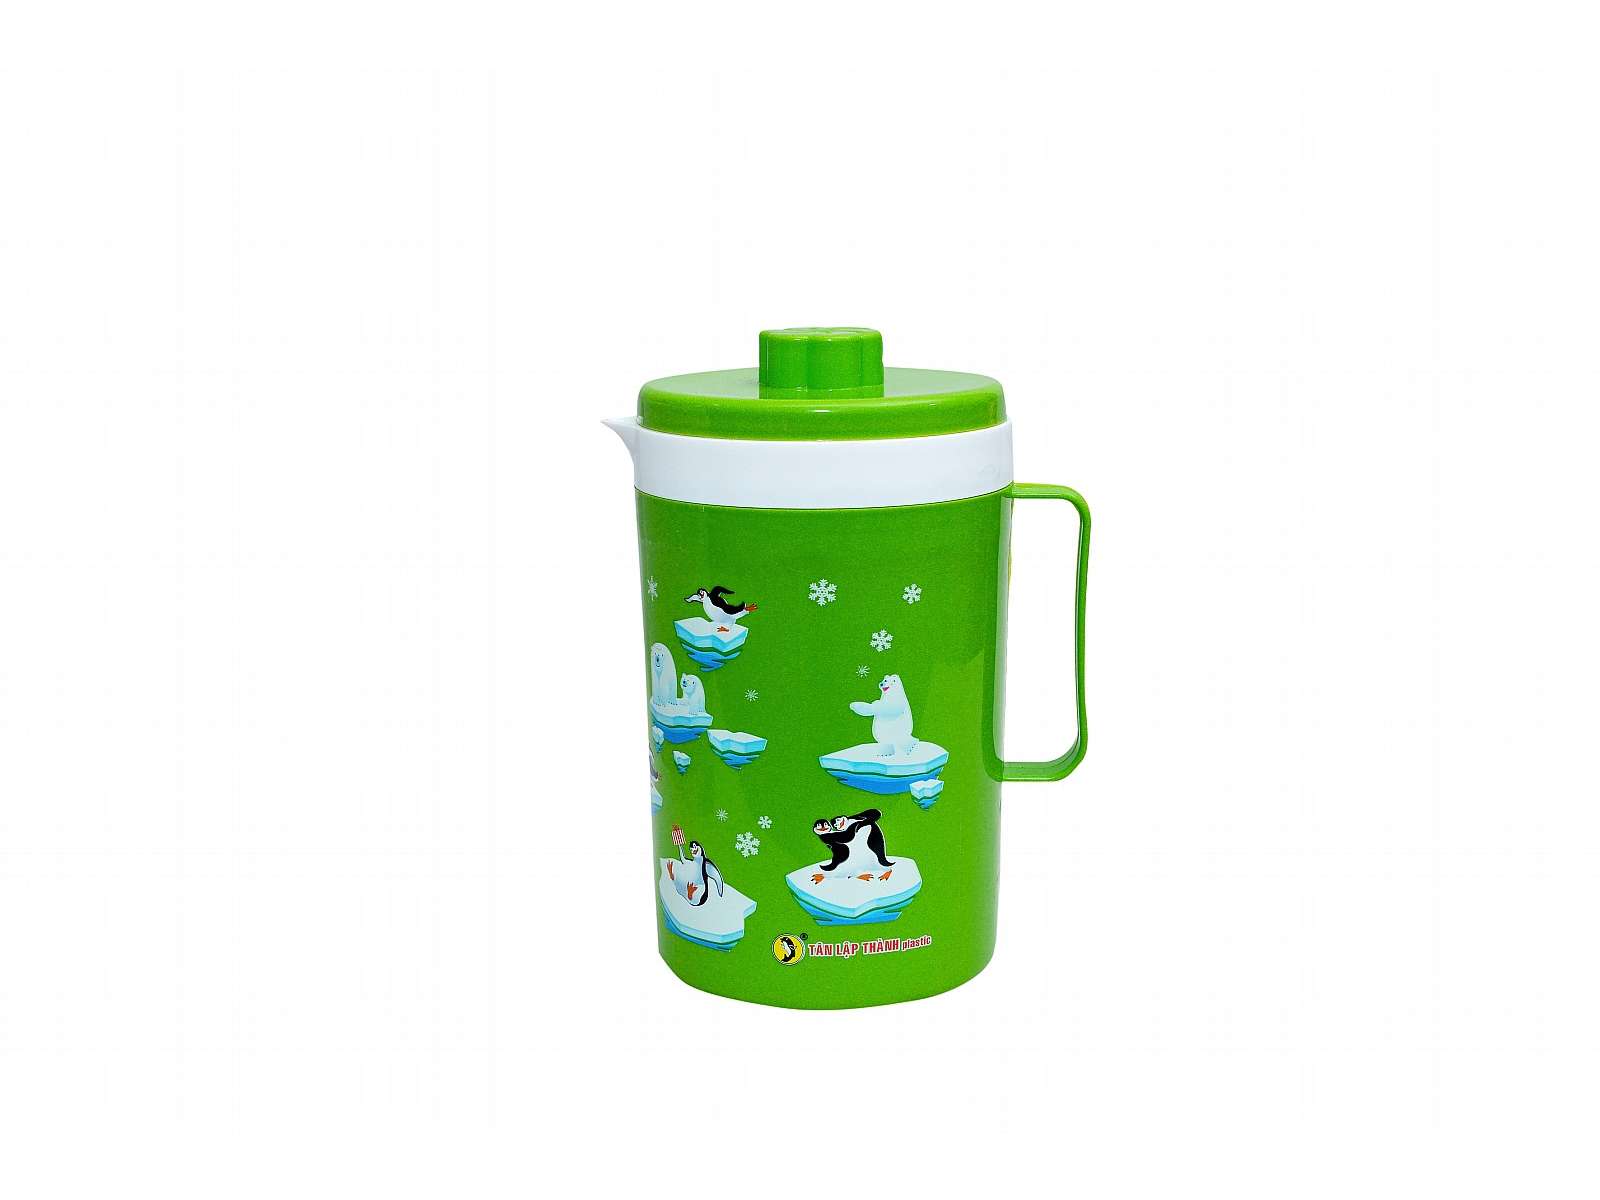 Double-wall Insulated Water Pitcher - Bear pattern - Large